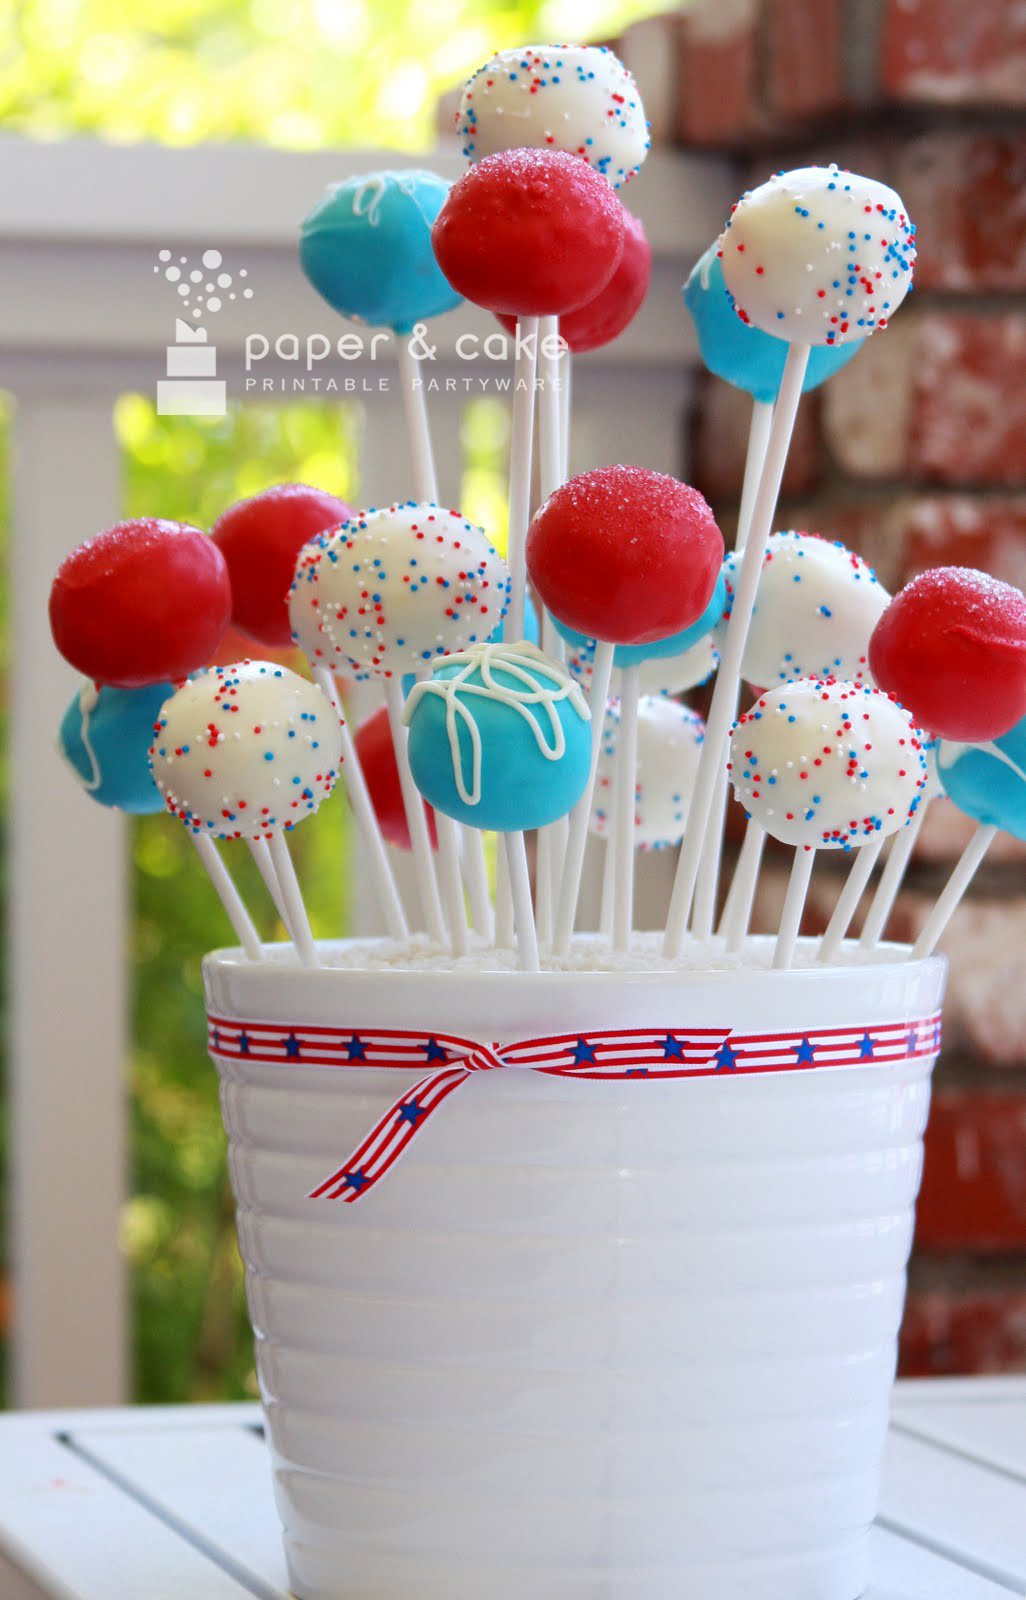 cake pops wedding centerpieces Fourth of July Cake Pop Stand from Paper & Cake